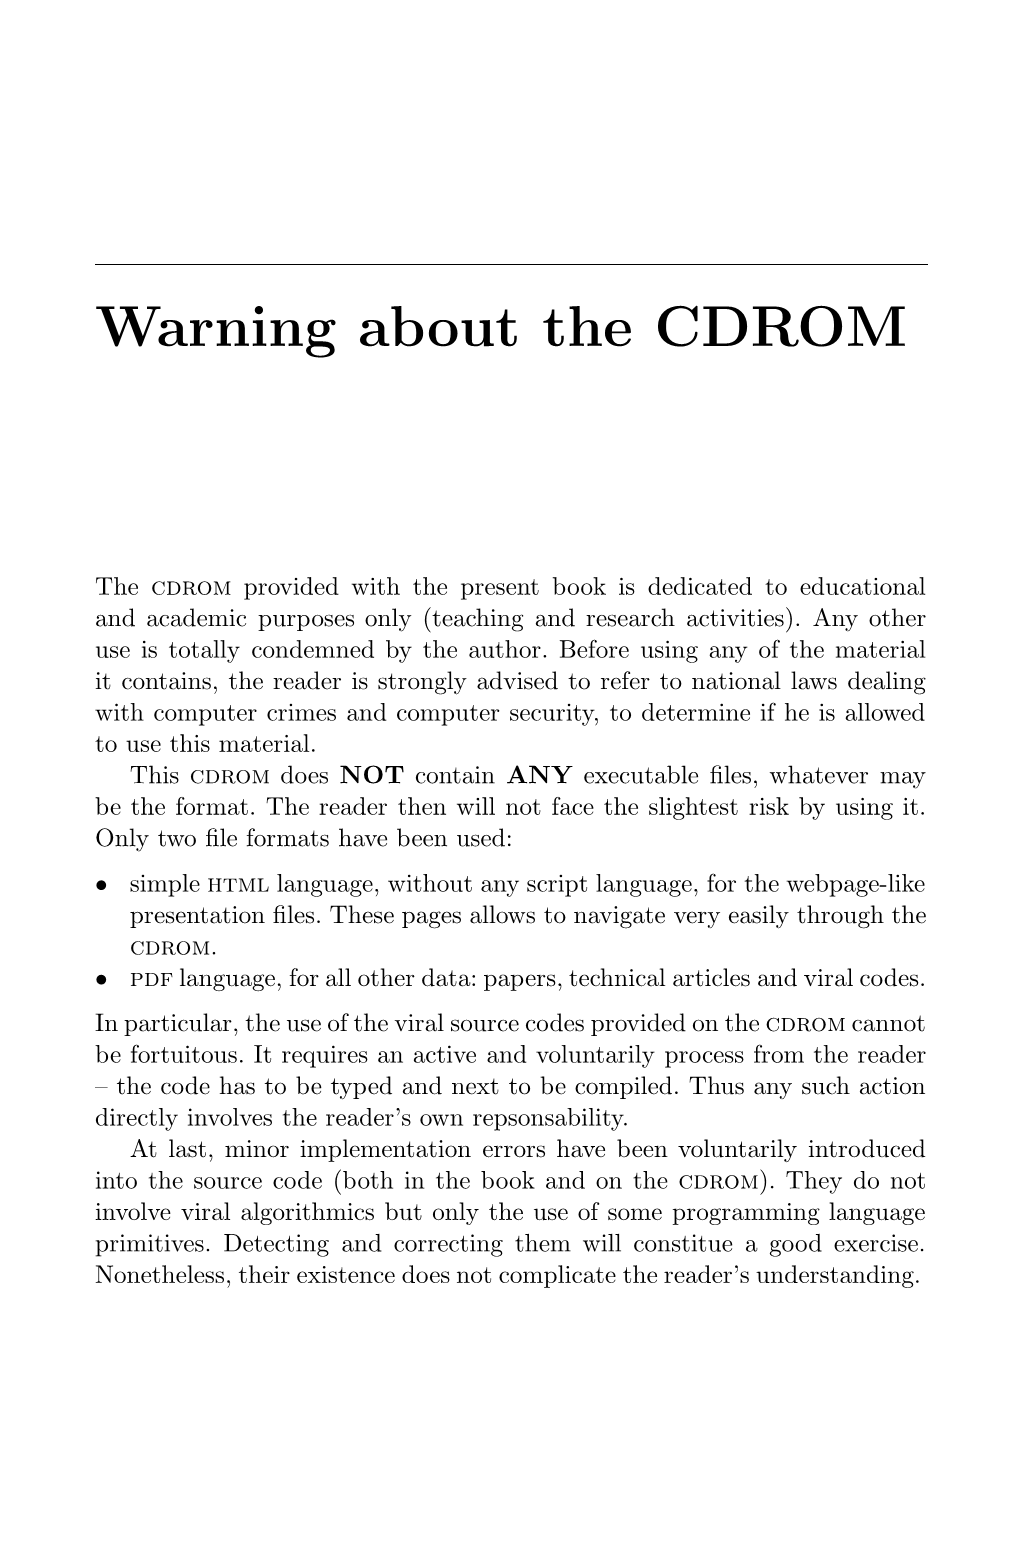 Warning About the CDROM